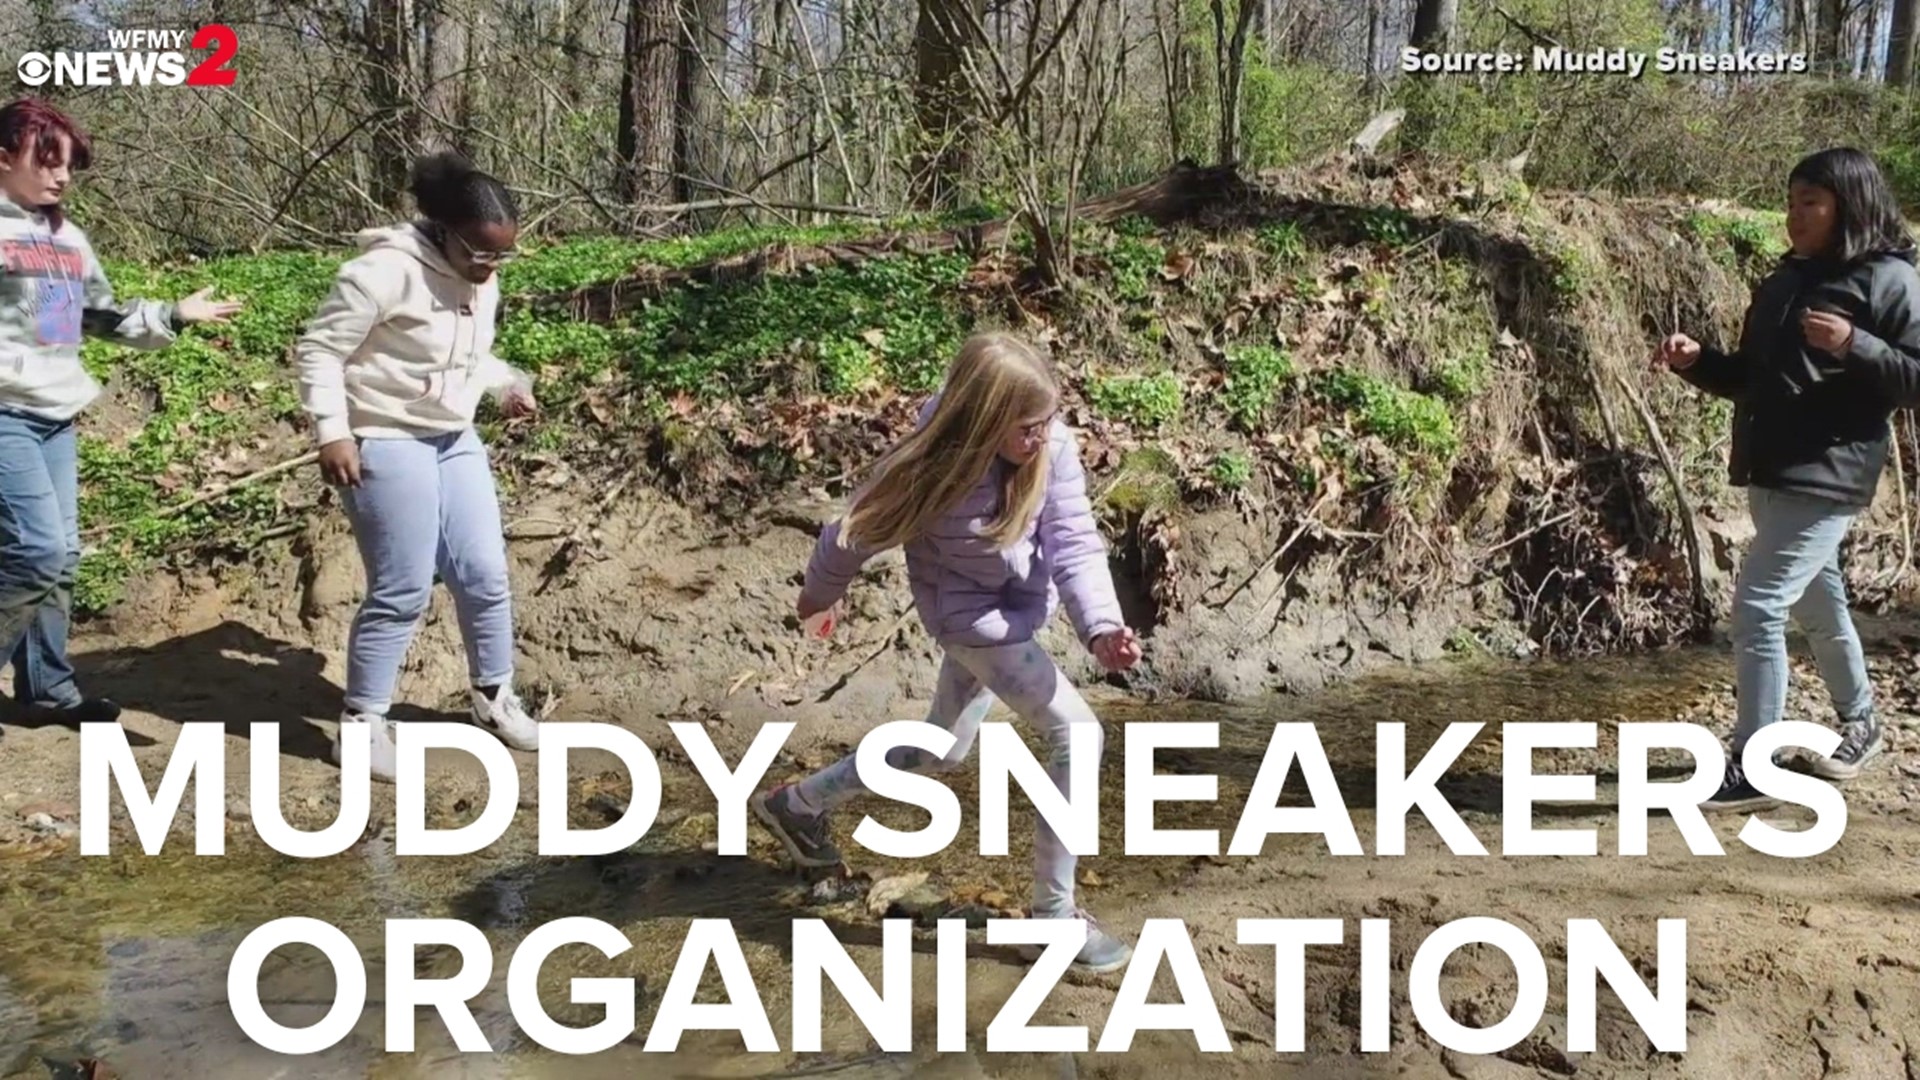 The Muddy Sneakers organization teaches kids the importance of playing outside.